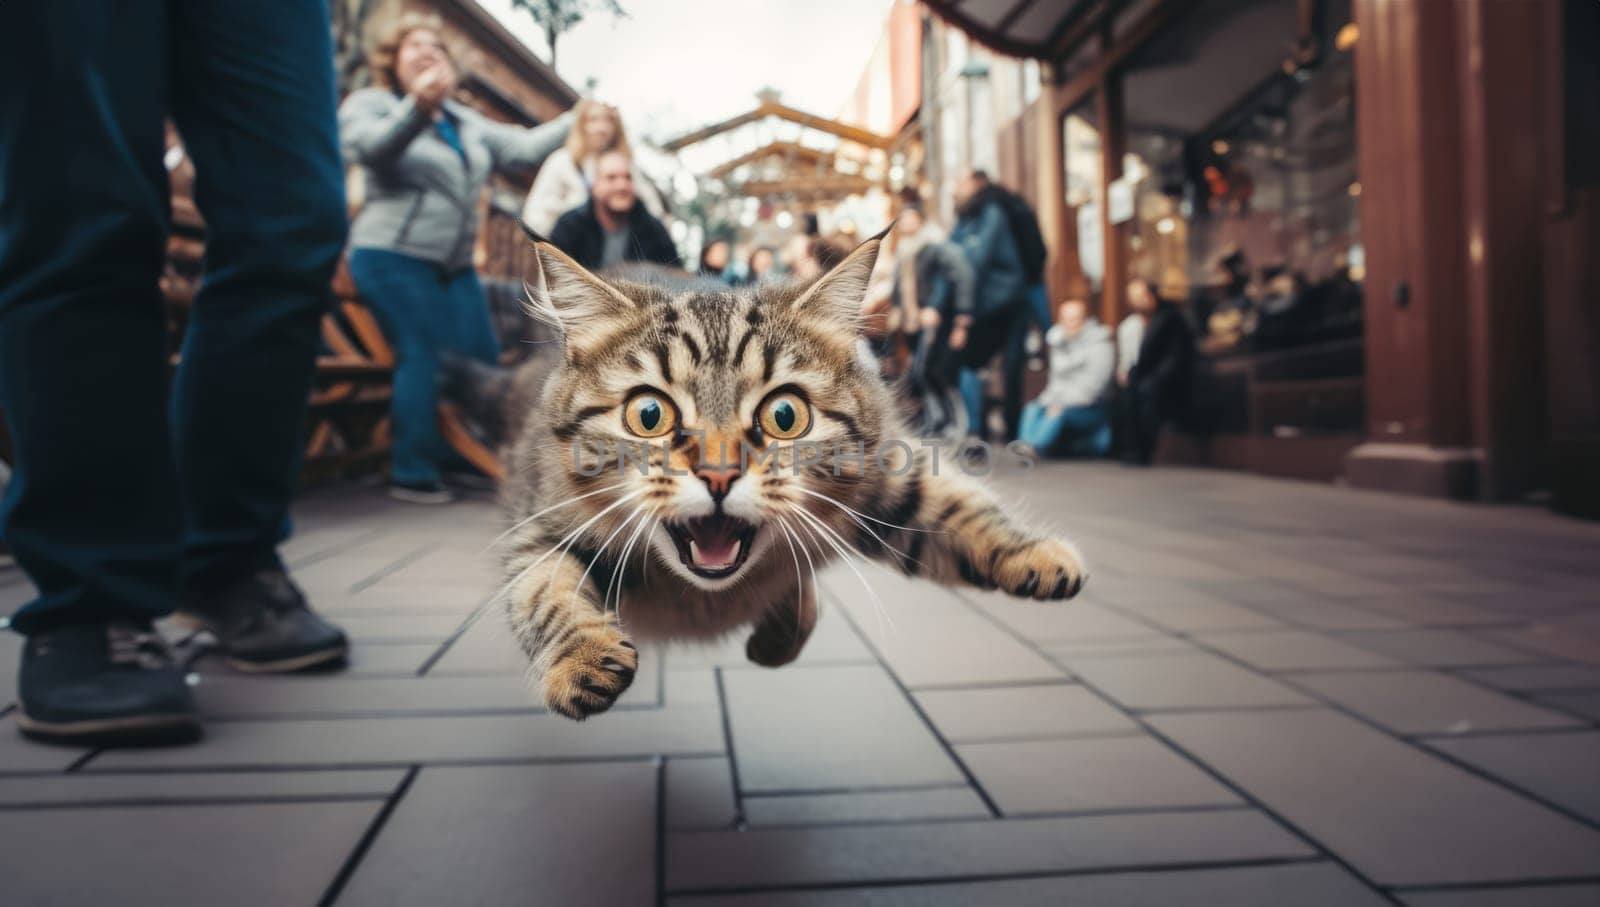 A close-up photograph captures a cat dashing through the urban streets with agility and speed, amidst the bustling cityscape.